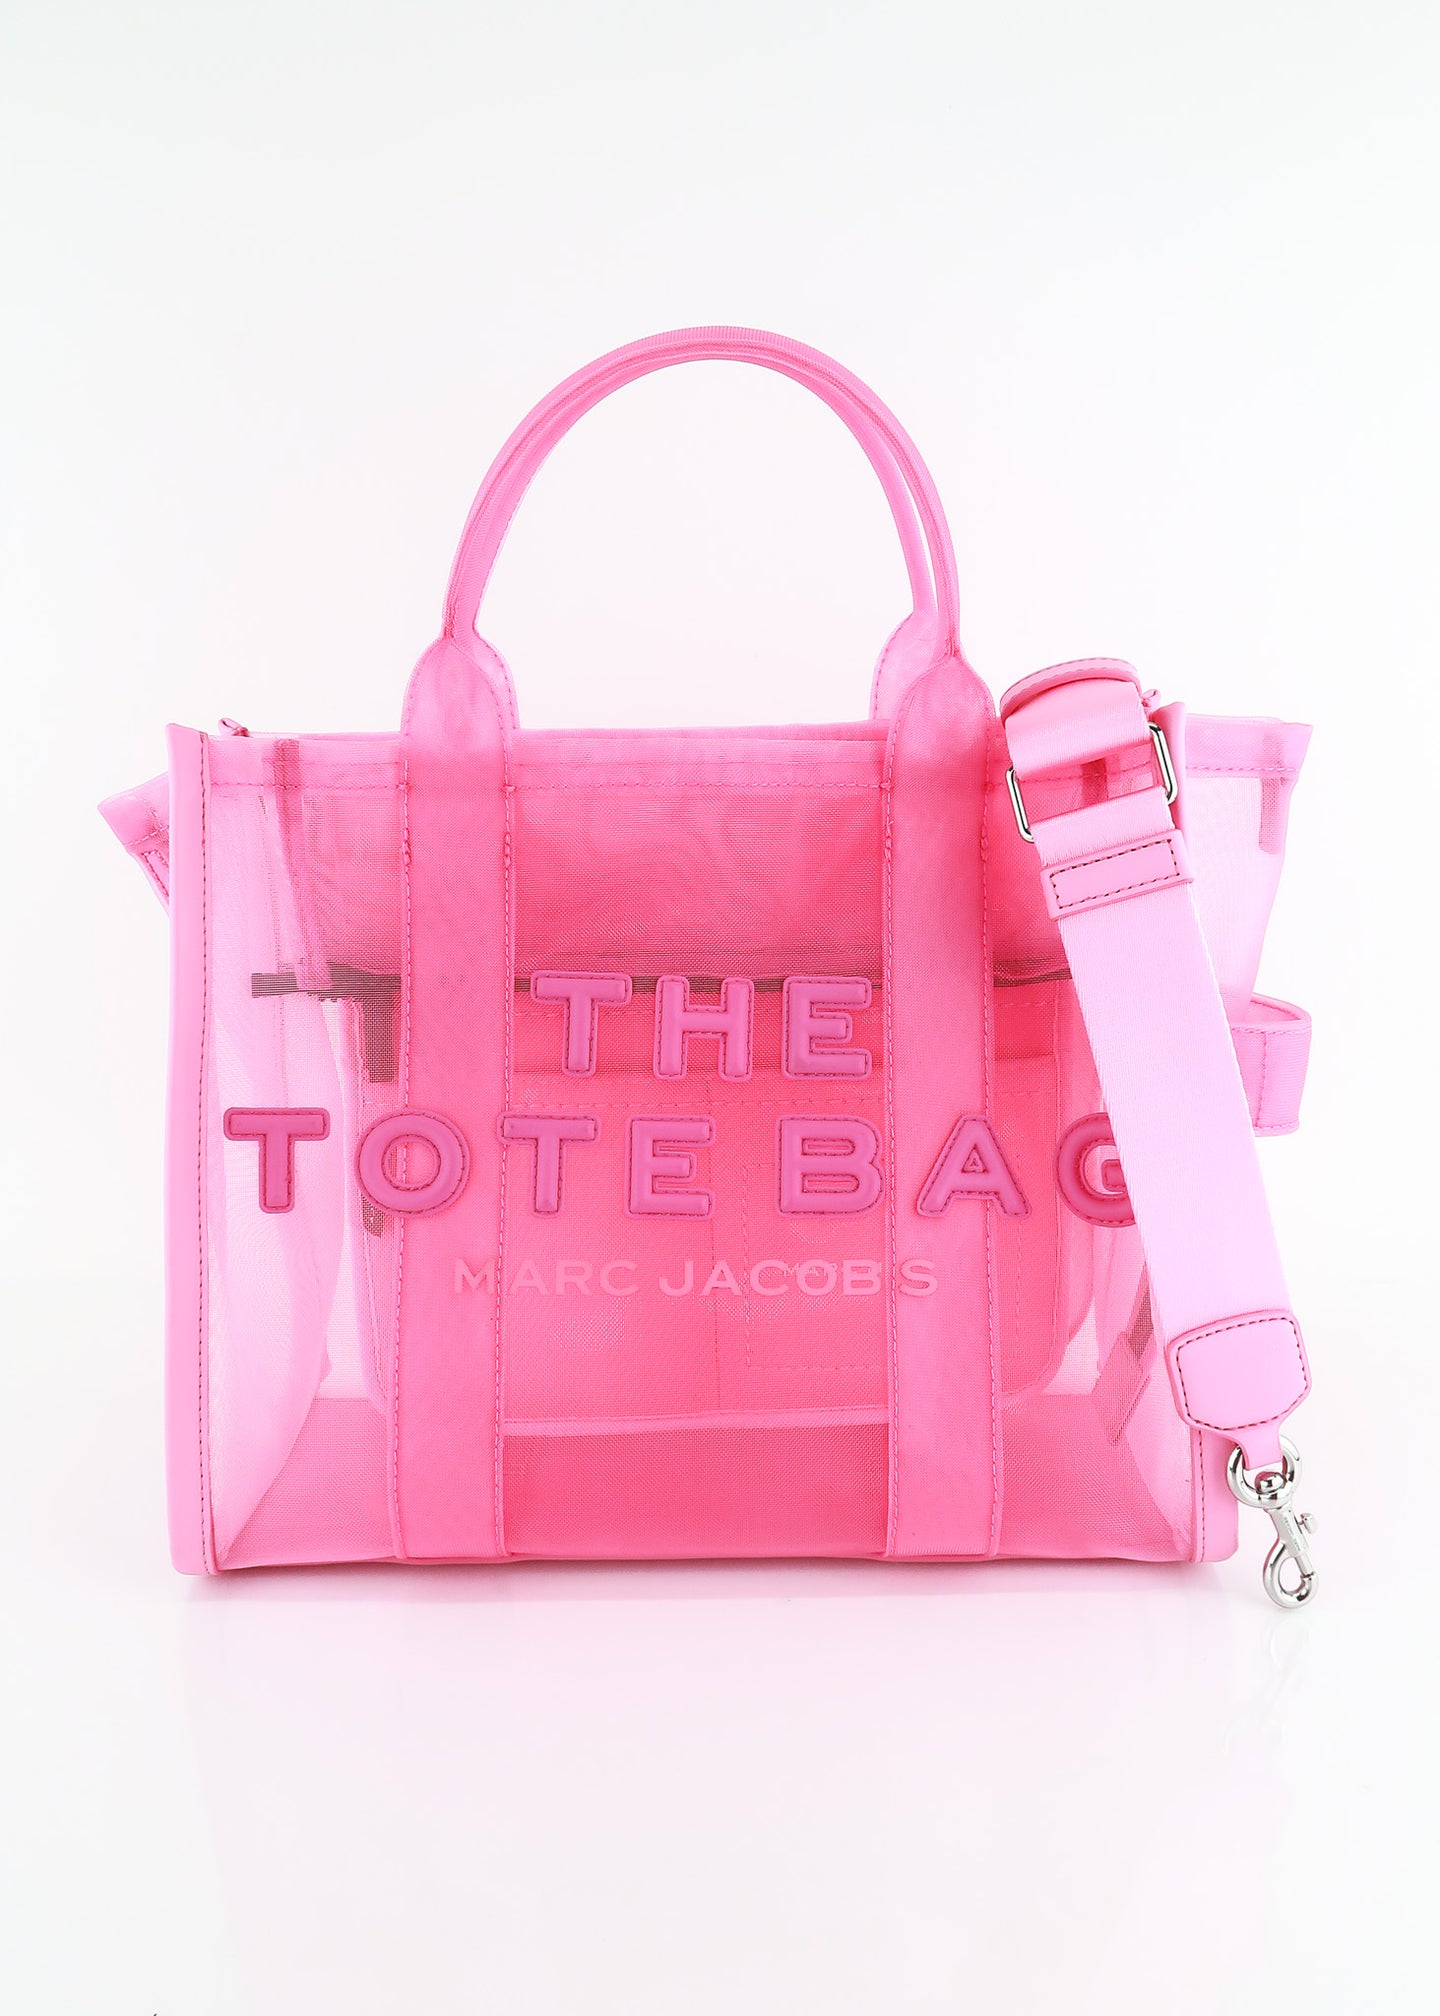 Marc Jacob leather medium tote bag in color candy pink